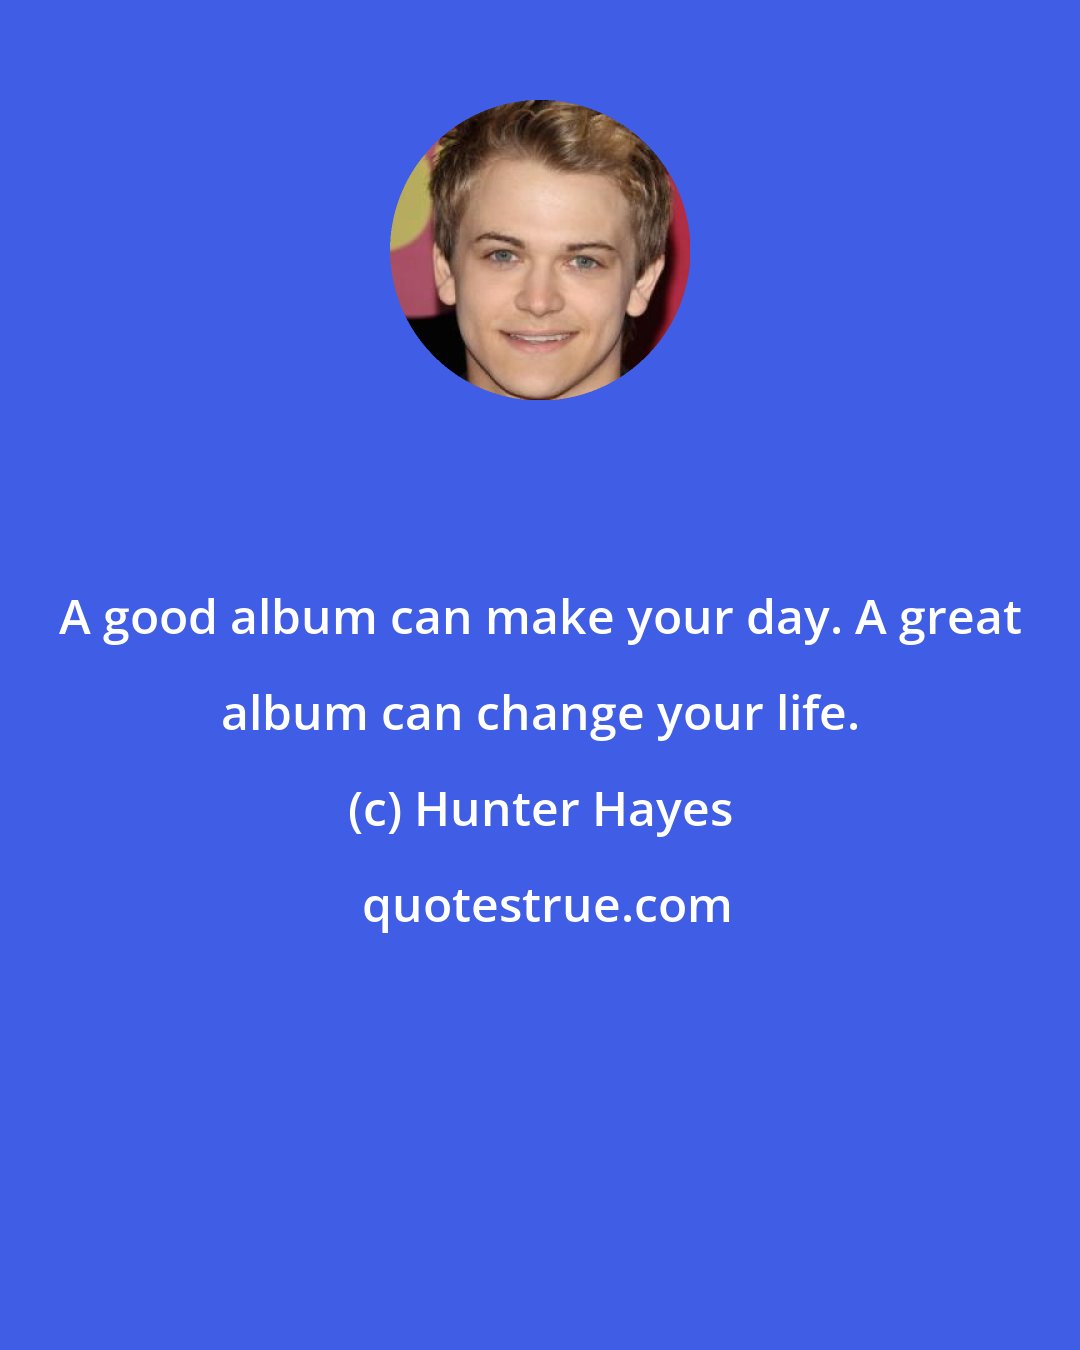 Hunter Hayes: A good album can make your day. A great album can change your life.